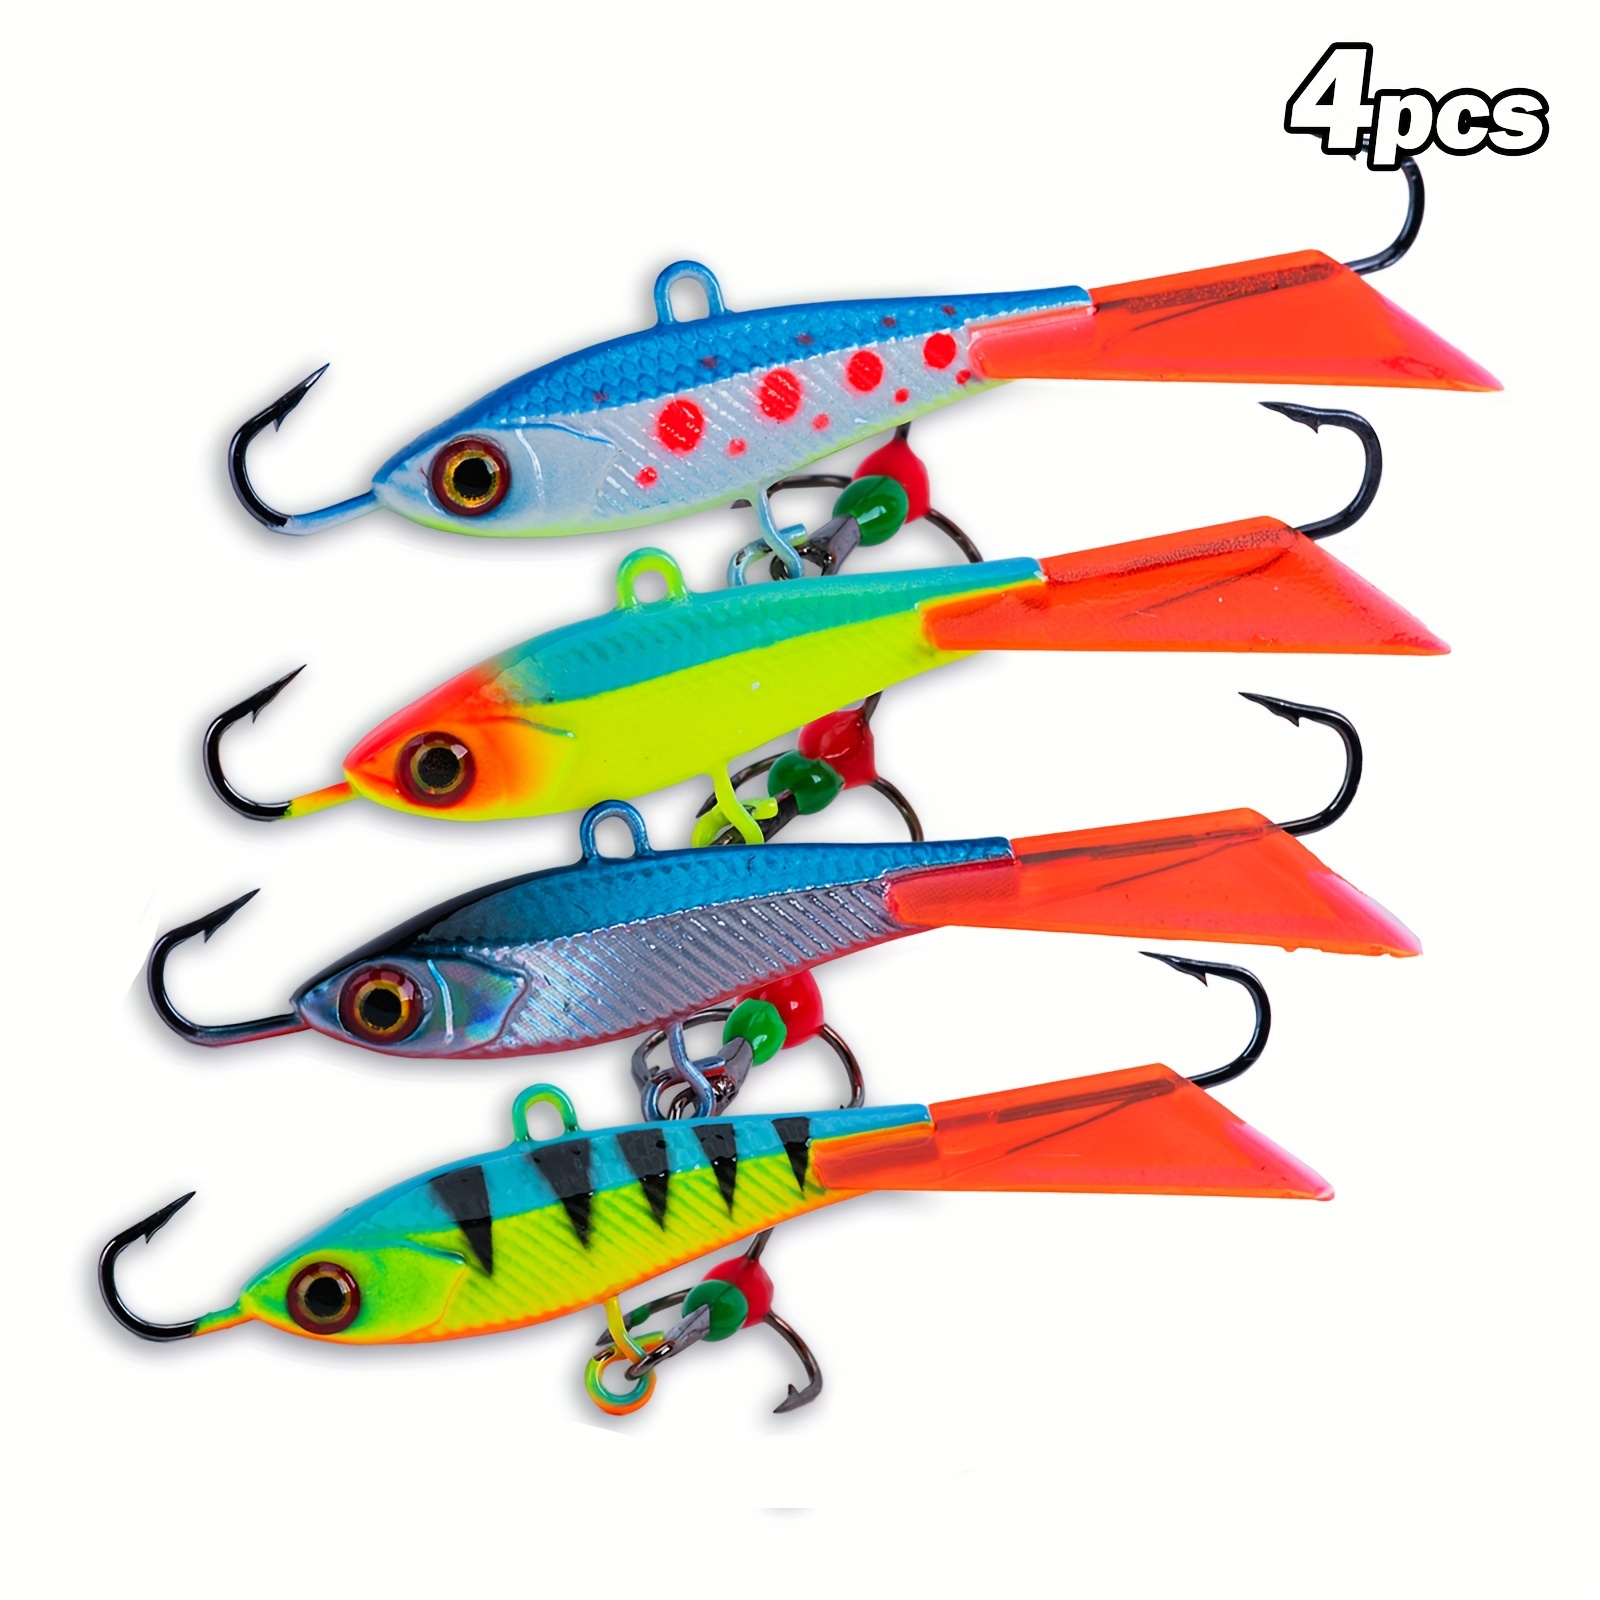  Milisten 5pcs Spinner Baitfish Ice Fishing Sled Convenient  Fish Hooks Ice Fishing Jigs Creative Sinking Perch Fake Baits Crappie Jigs  Fish Hooks for Outdoor Fishing Tool to Rotate Lure 